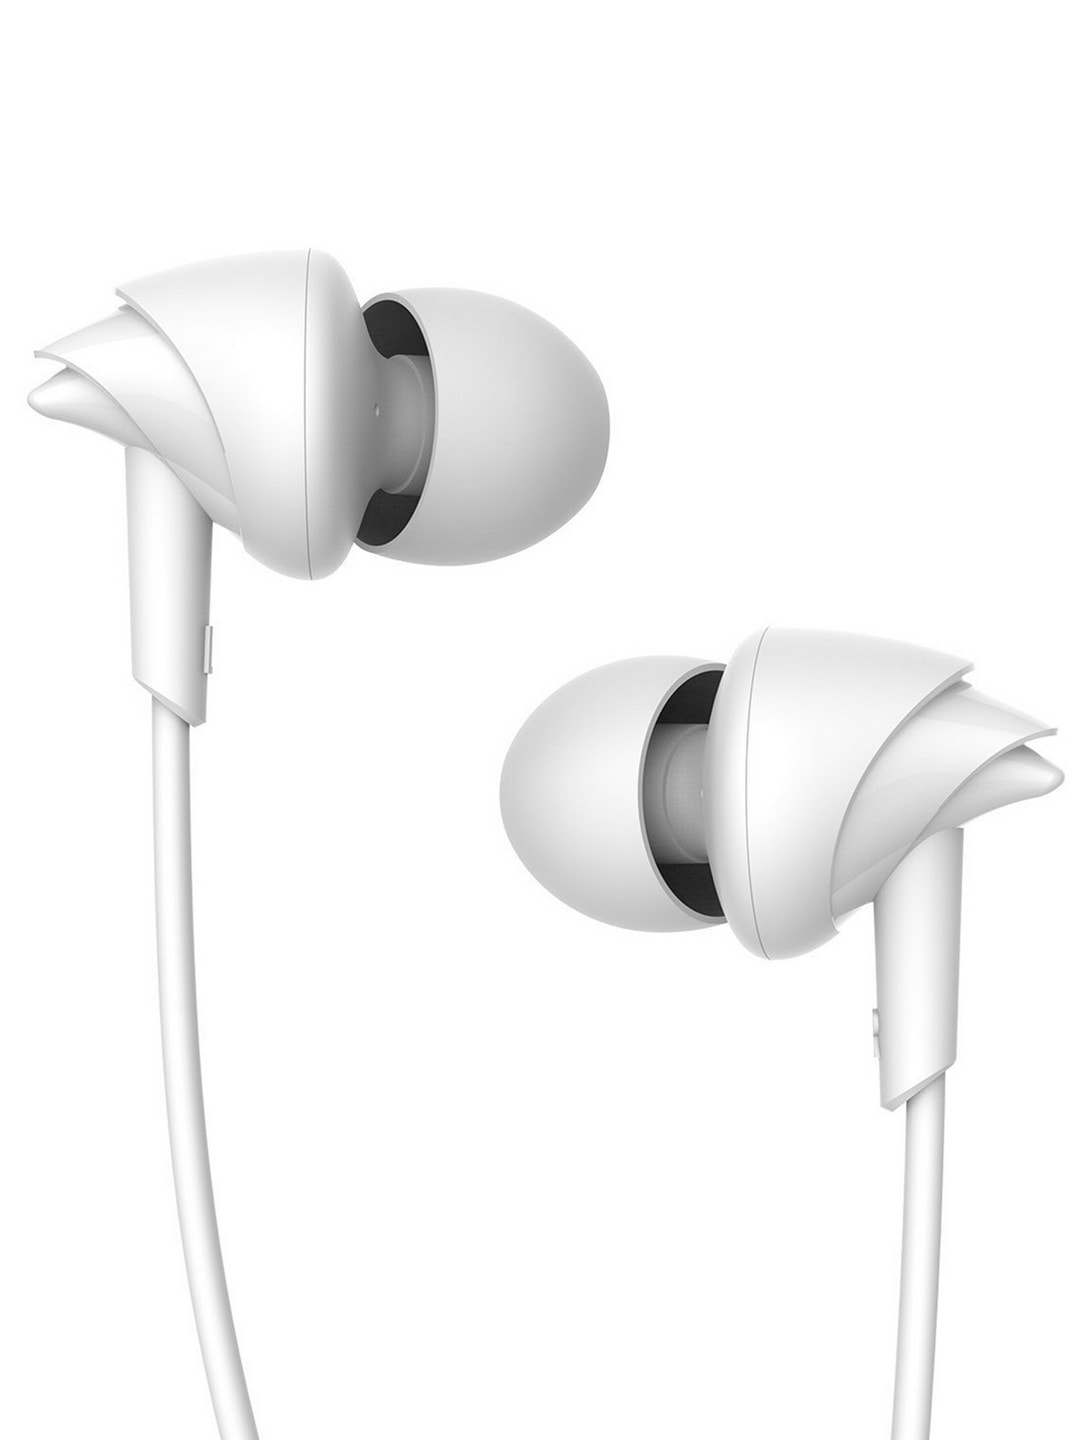 boAt BassHeads 100 M White Wired Earphones with Enhanced Bass Hawk-Inspired Design & Mic Price in India